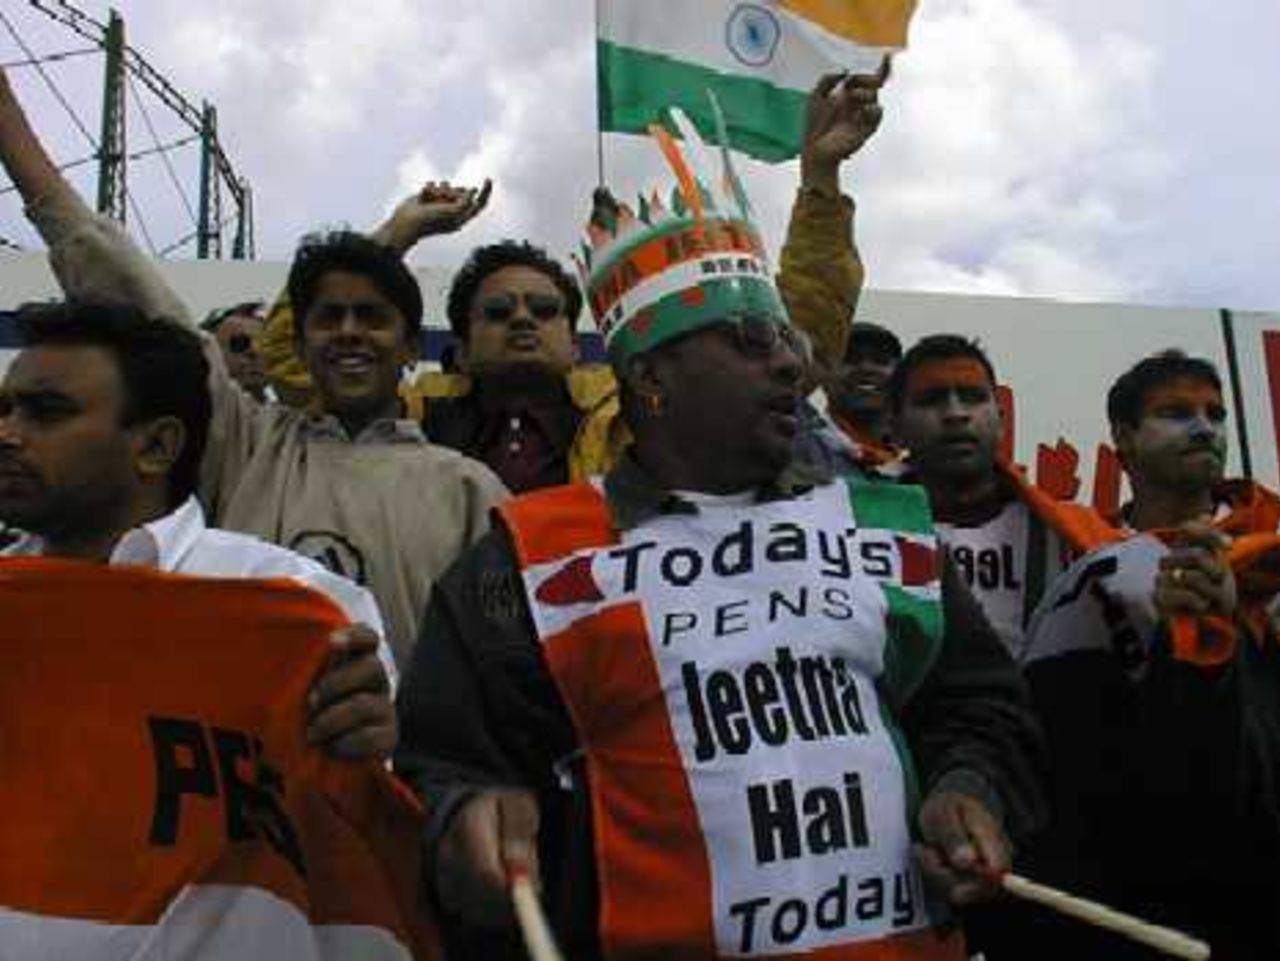 Indian fans at the Oval wearing a slogan "jeetna hai Today" (Must win today) at the 4 June 1999 opening Super Six match against Australia, WC99